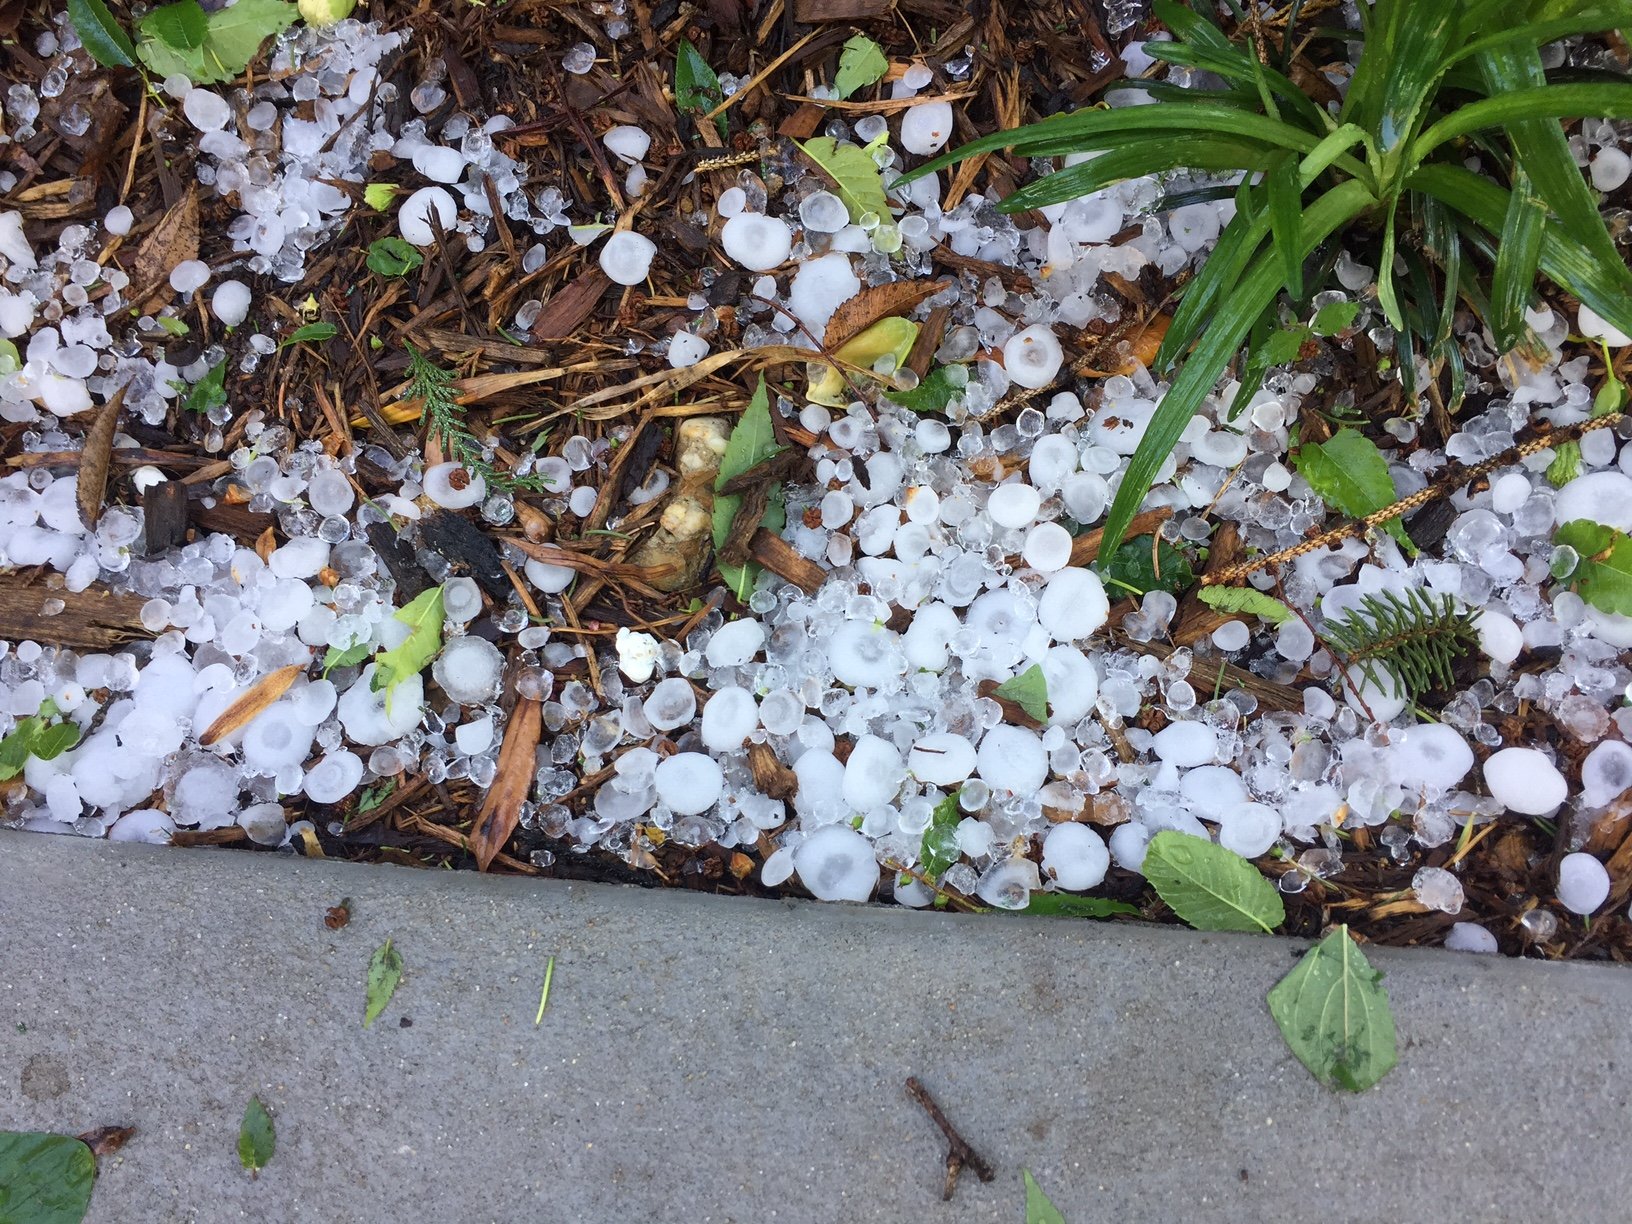 Hail gathers after a storm in the D.C. area on April 21, 2017. (Courtesy Don Squires)